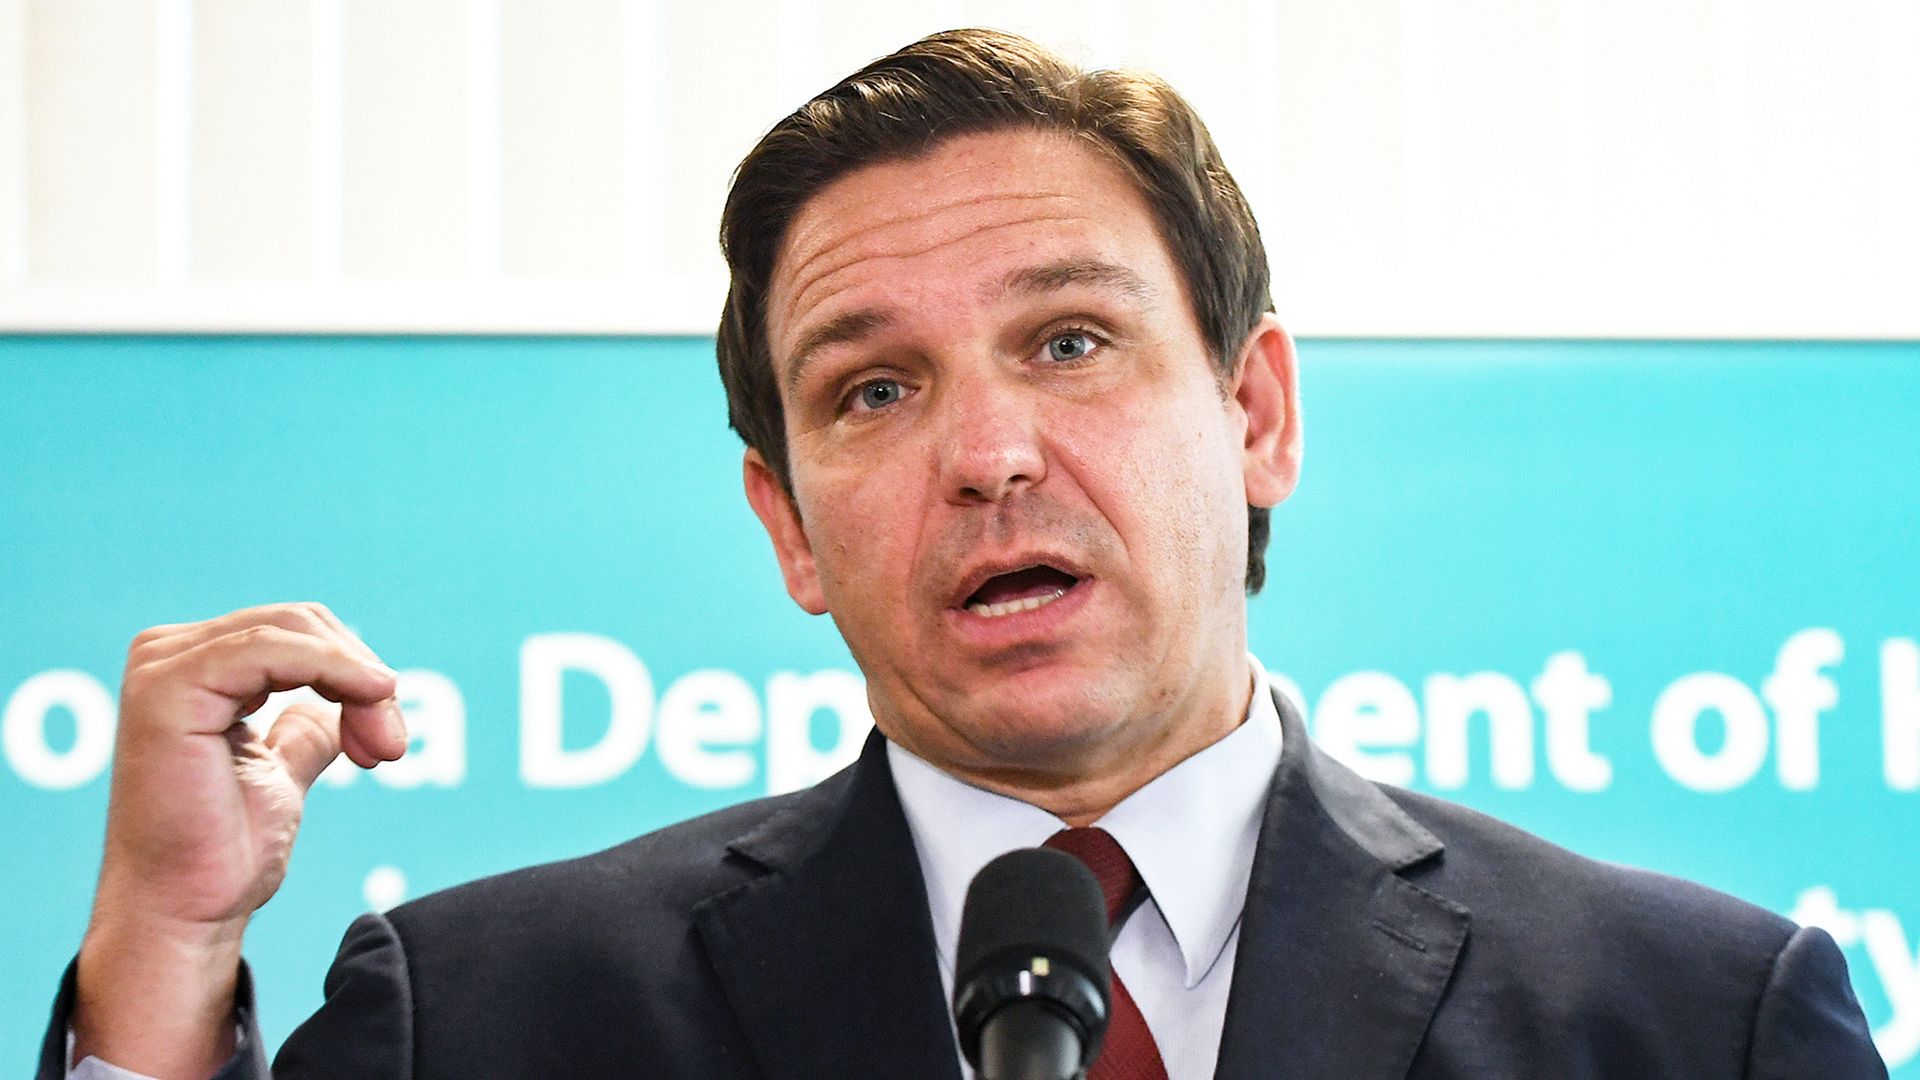  Florida Governor Ron DeSantis holds a news conference at the Florida Department of Health office in Viera, Florida, Sept. 1.